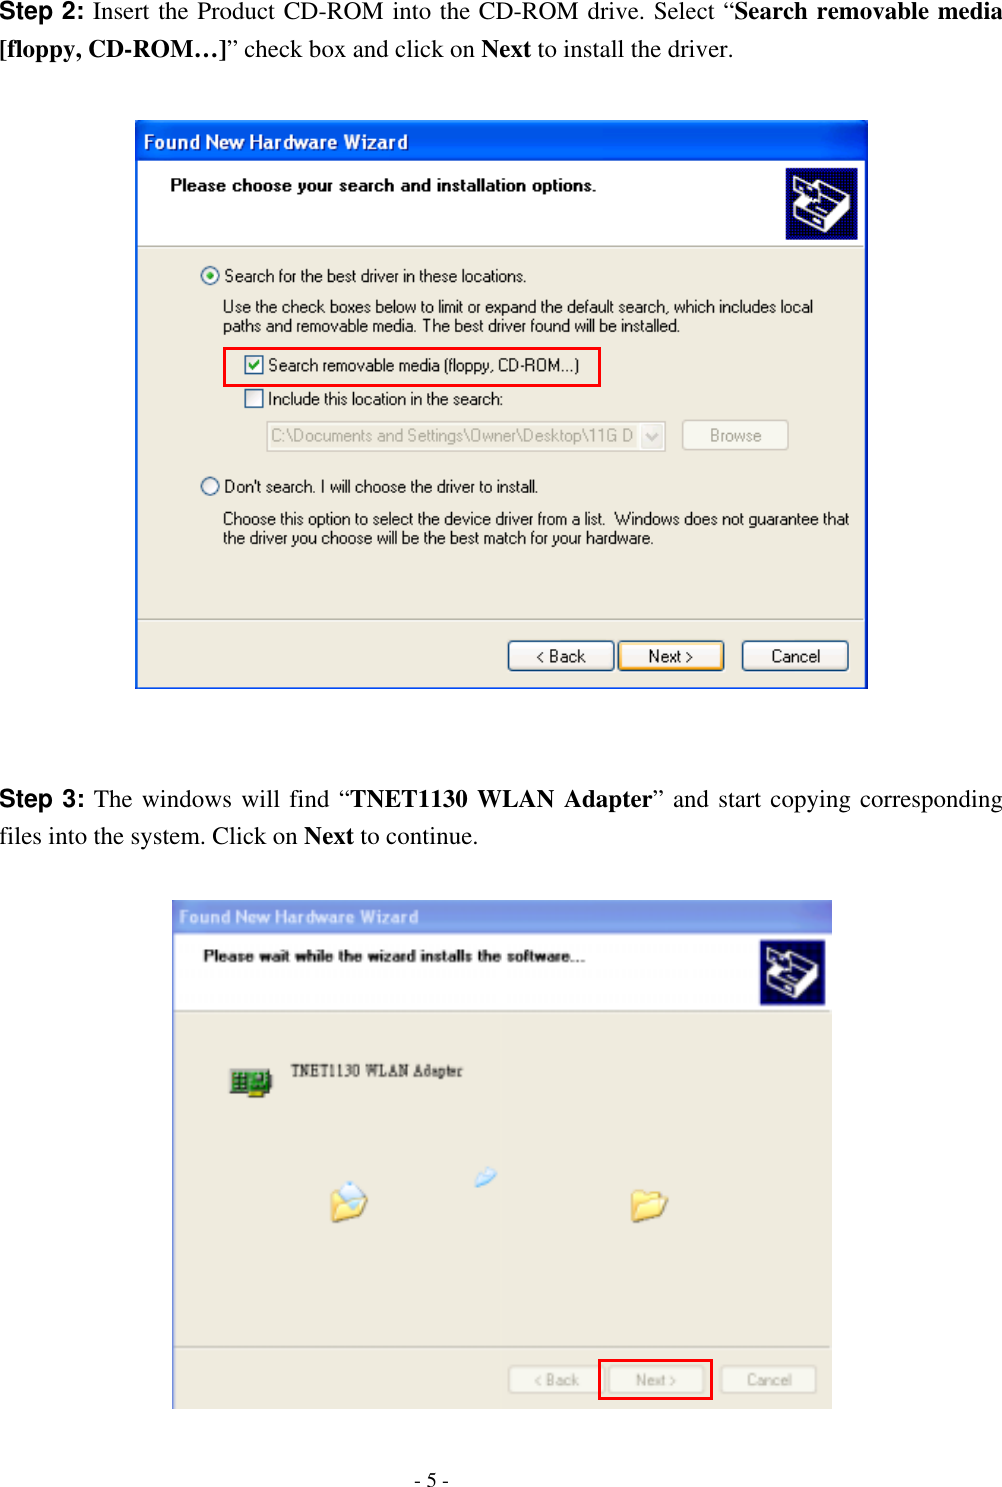    - 5 - Step 2: Insert the Product CD-ROM into the CD-ROM drive. Select “Search removable media [floppy, CD-ROM…]” check box and click on Next to install the driver.     Step 3: The windows will find “TNET1130 WLAN Adapter” and start copying corresponding files into the system. Click on Next to continue.   